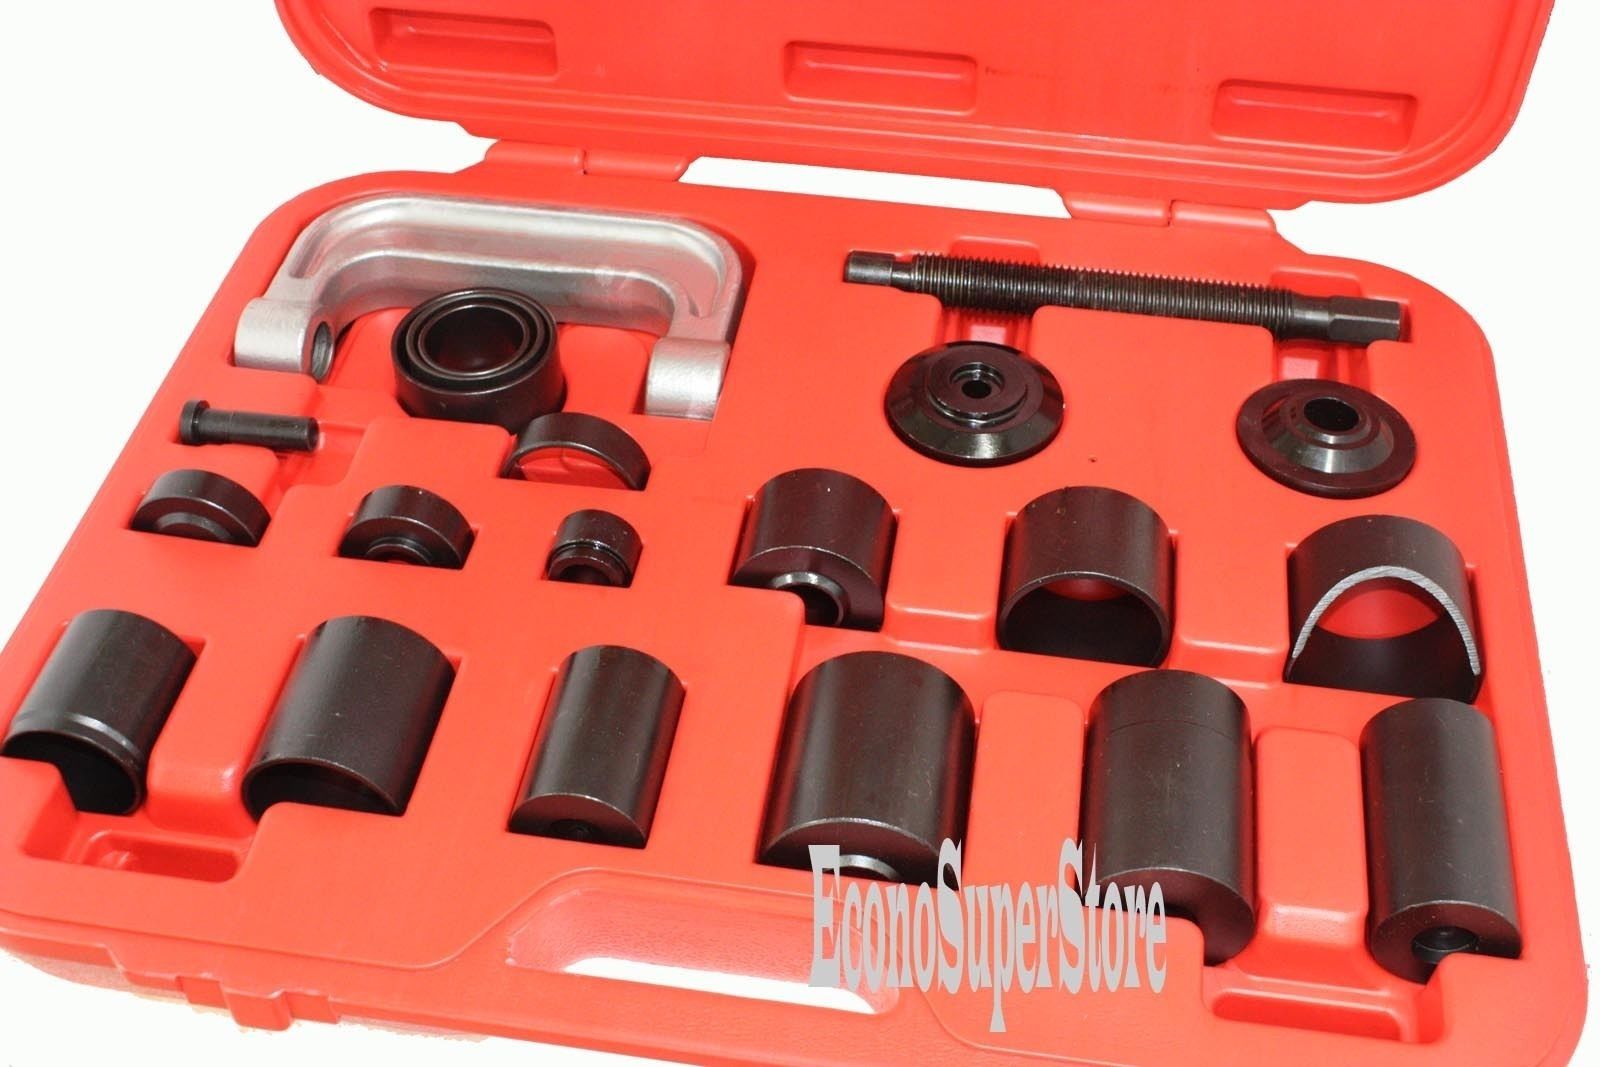 21PC C-PRESS BALL JOINT MASTER SET SERVICE KIT REMOVER INSTALLER 2/4WD AUTO 